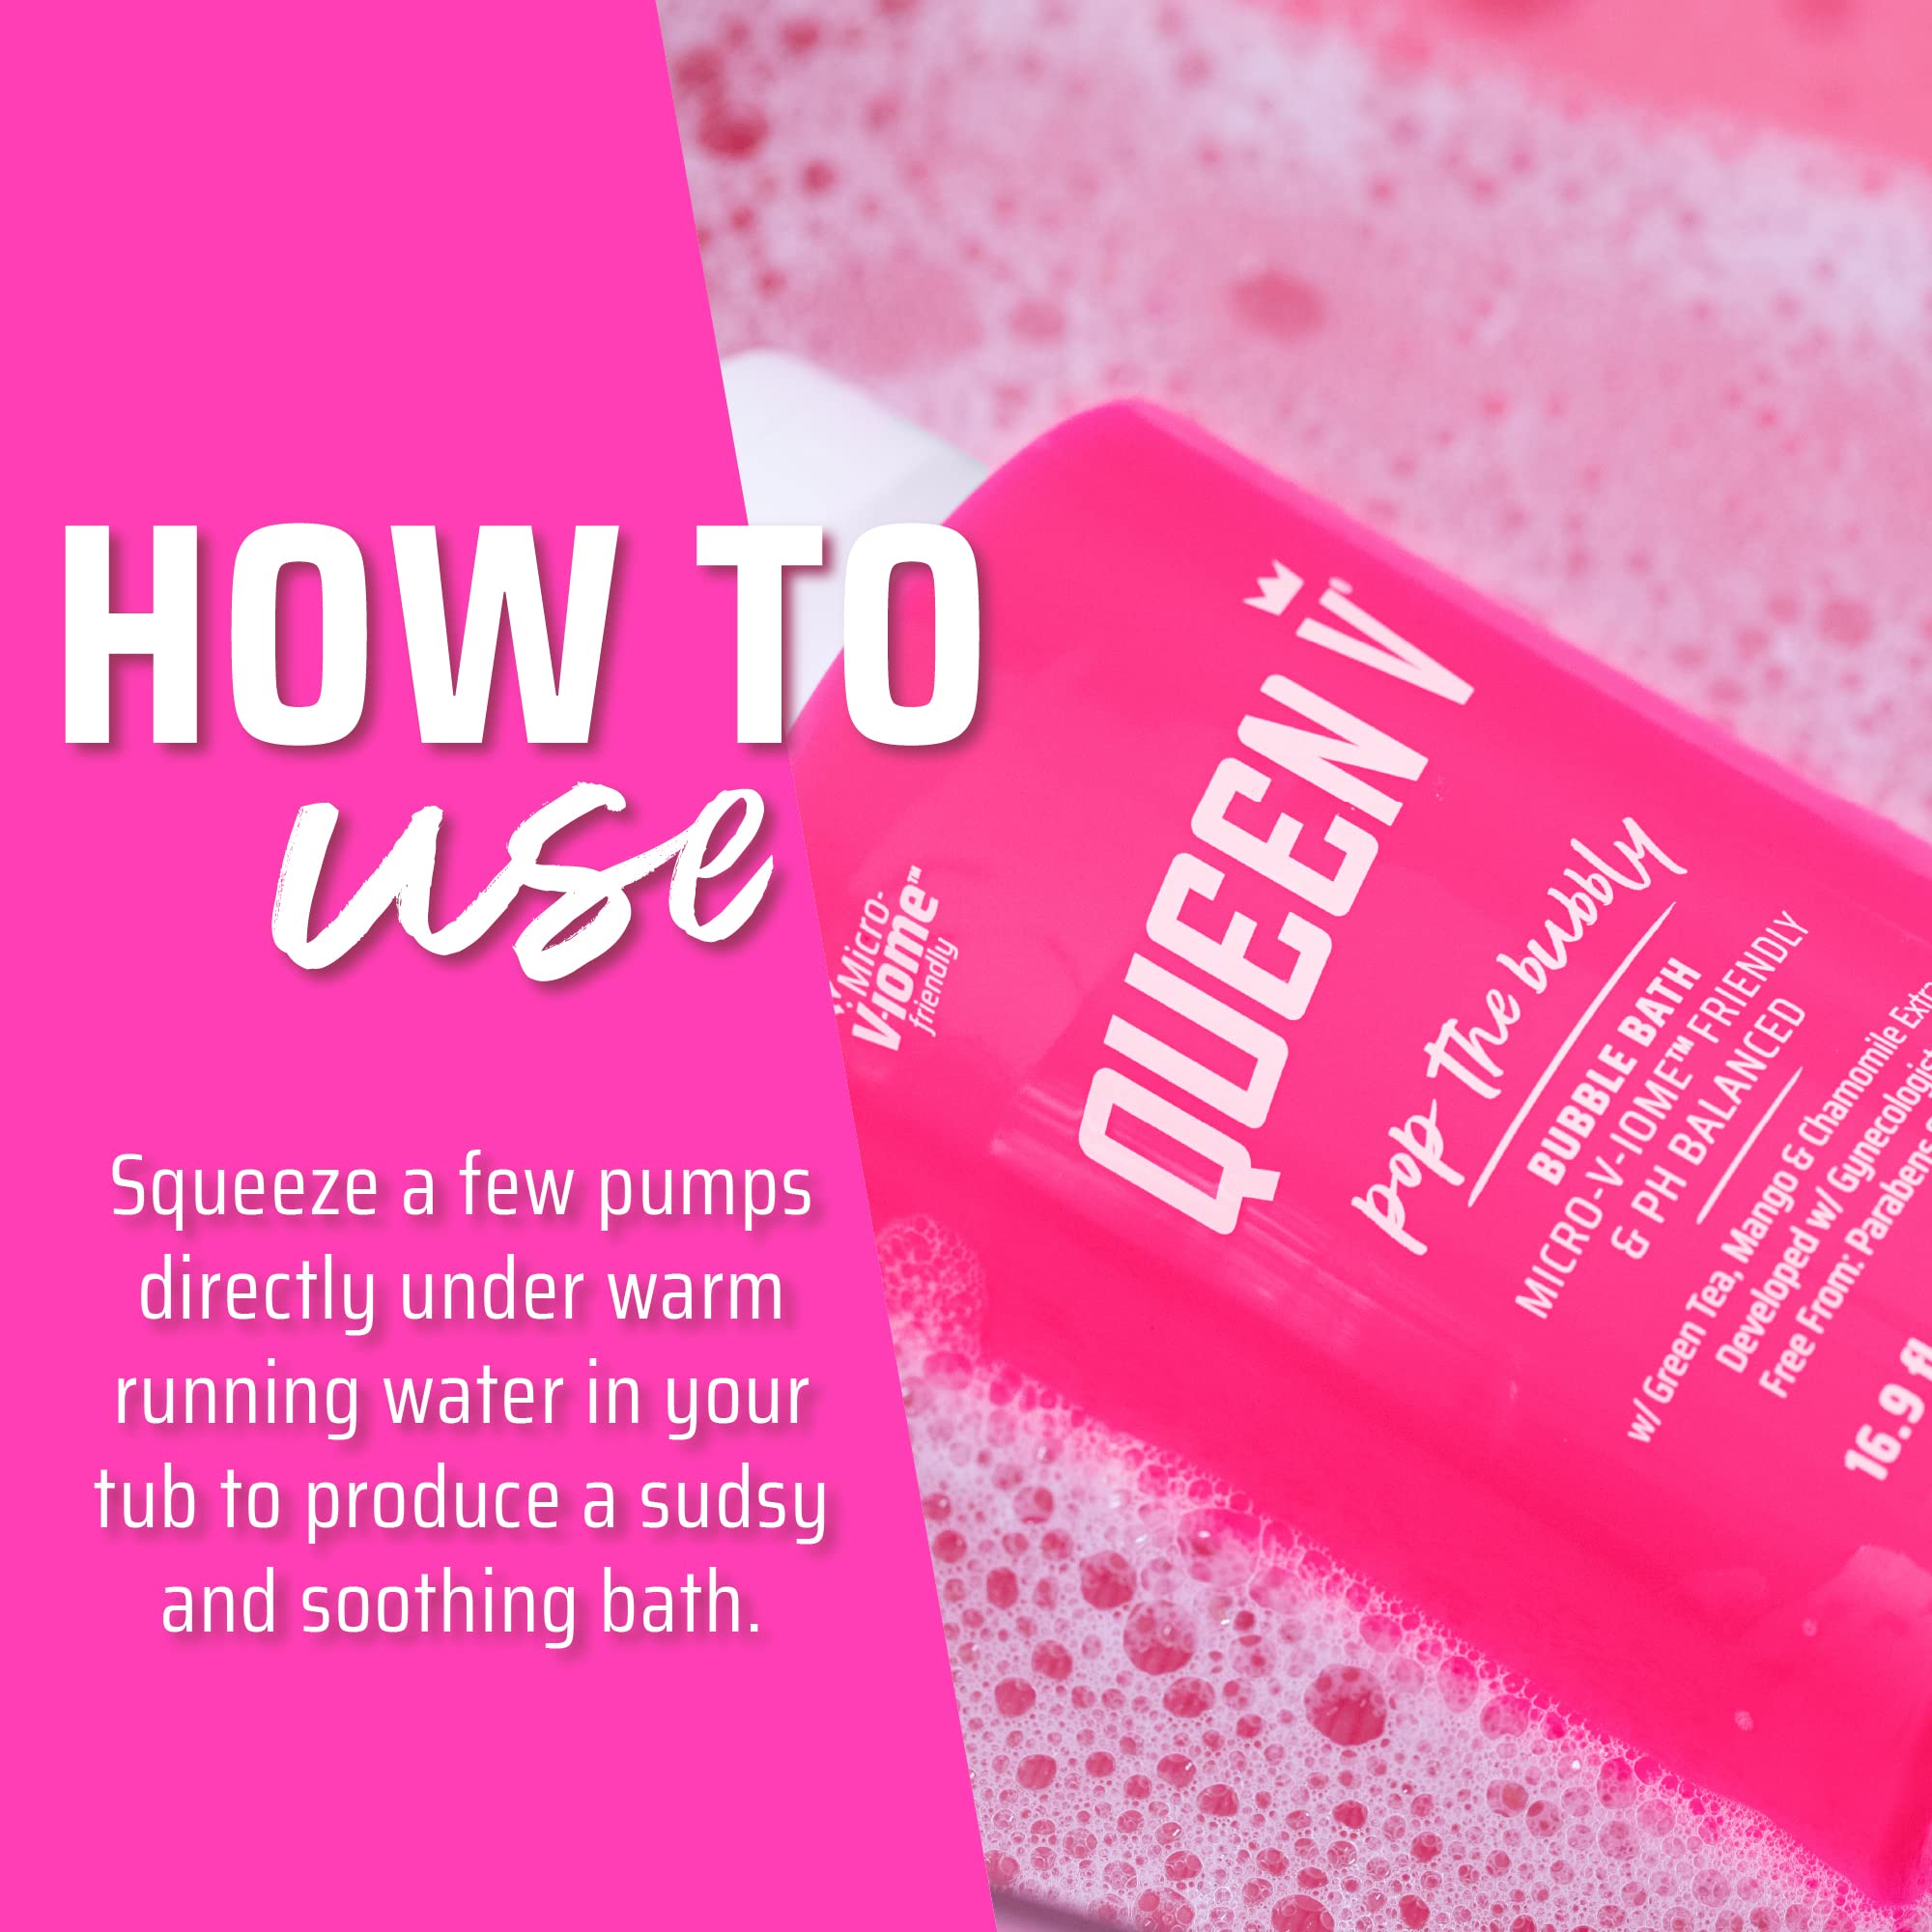 Queen V Pop the Bubbly Bubblebath pH Balanced, Enriched with Aloe and Rose Water, For Use on External Intimate Area